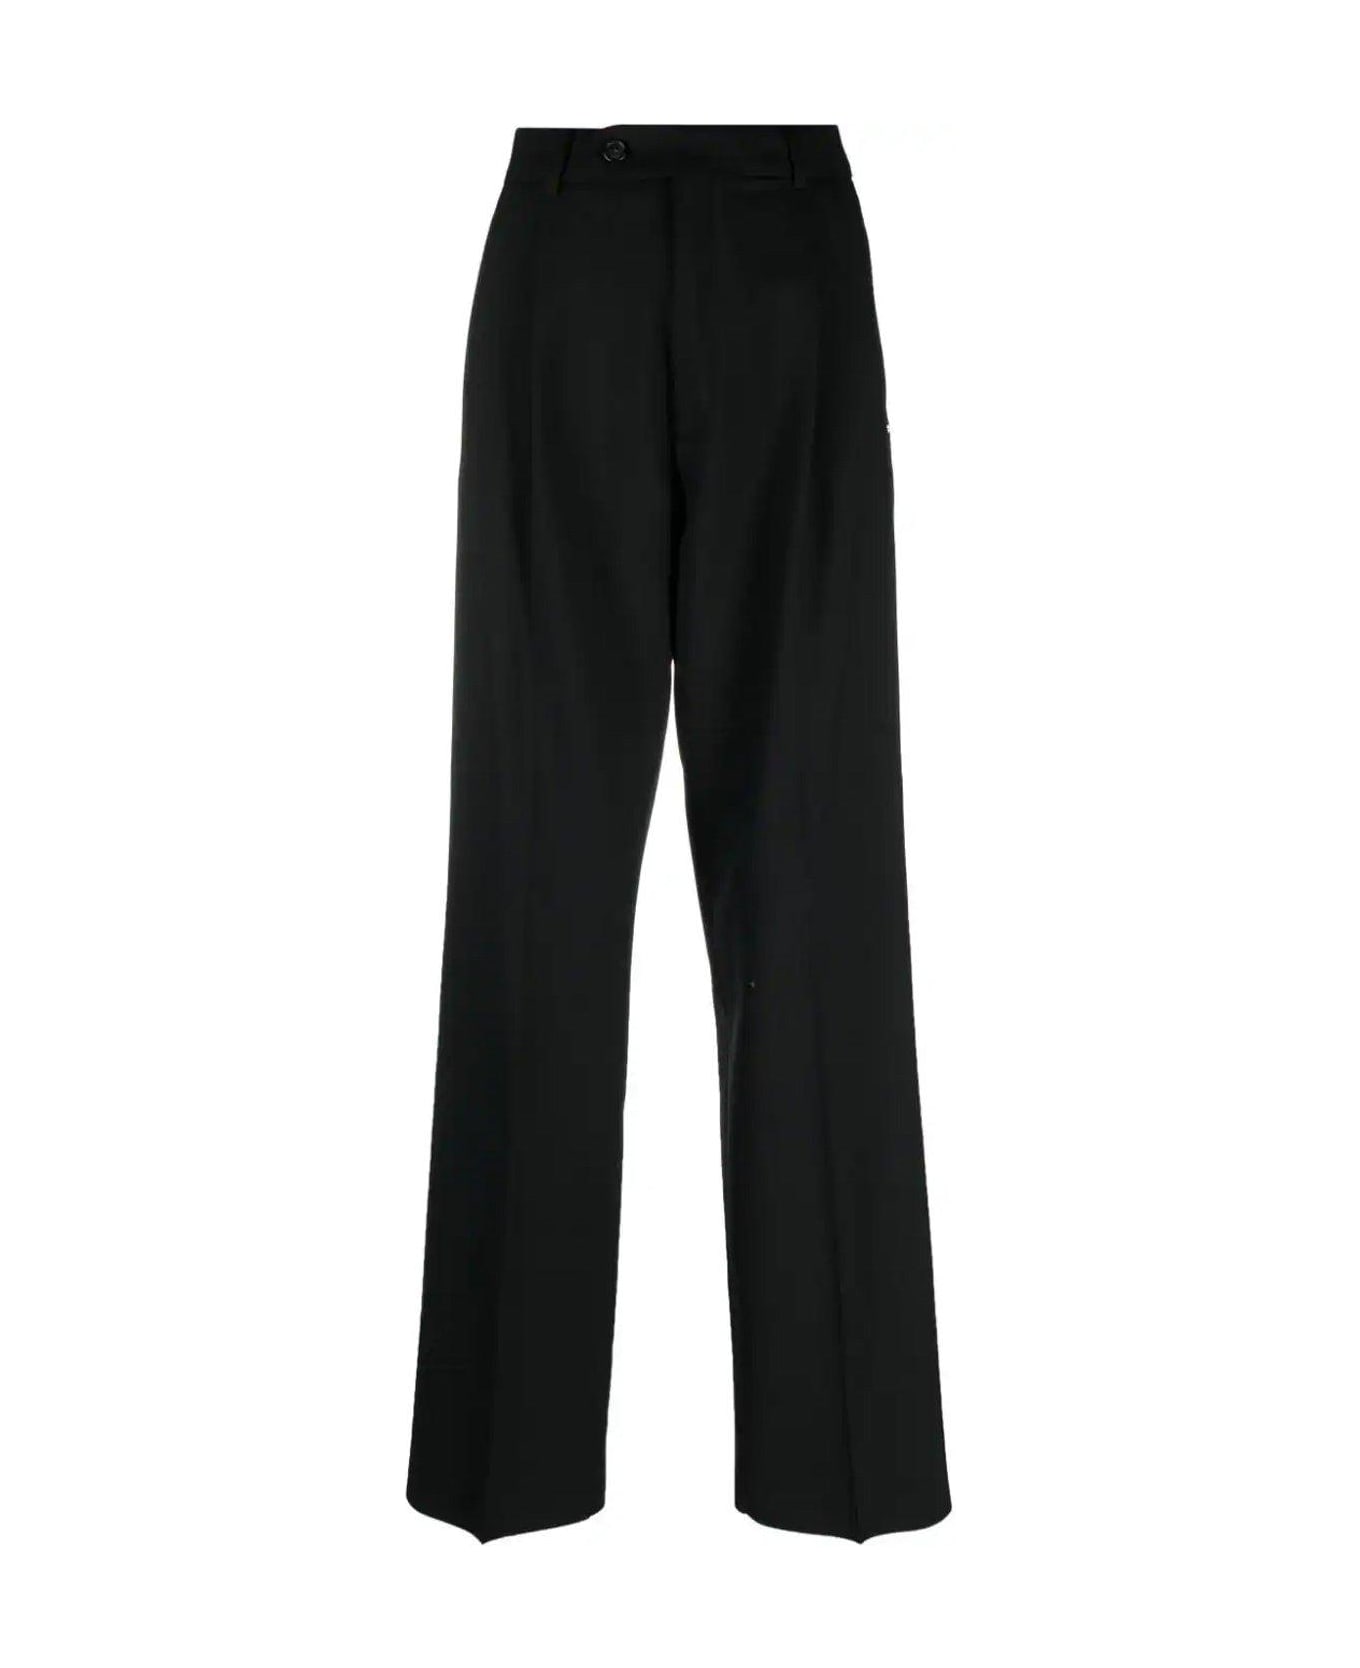 SportMax Pleated Tailored Trousers - NERO